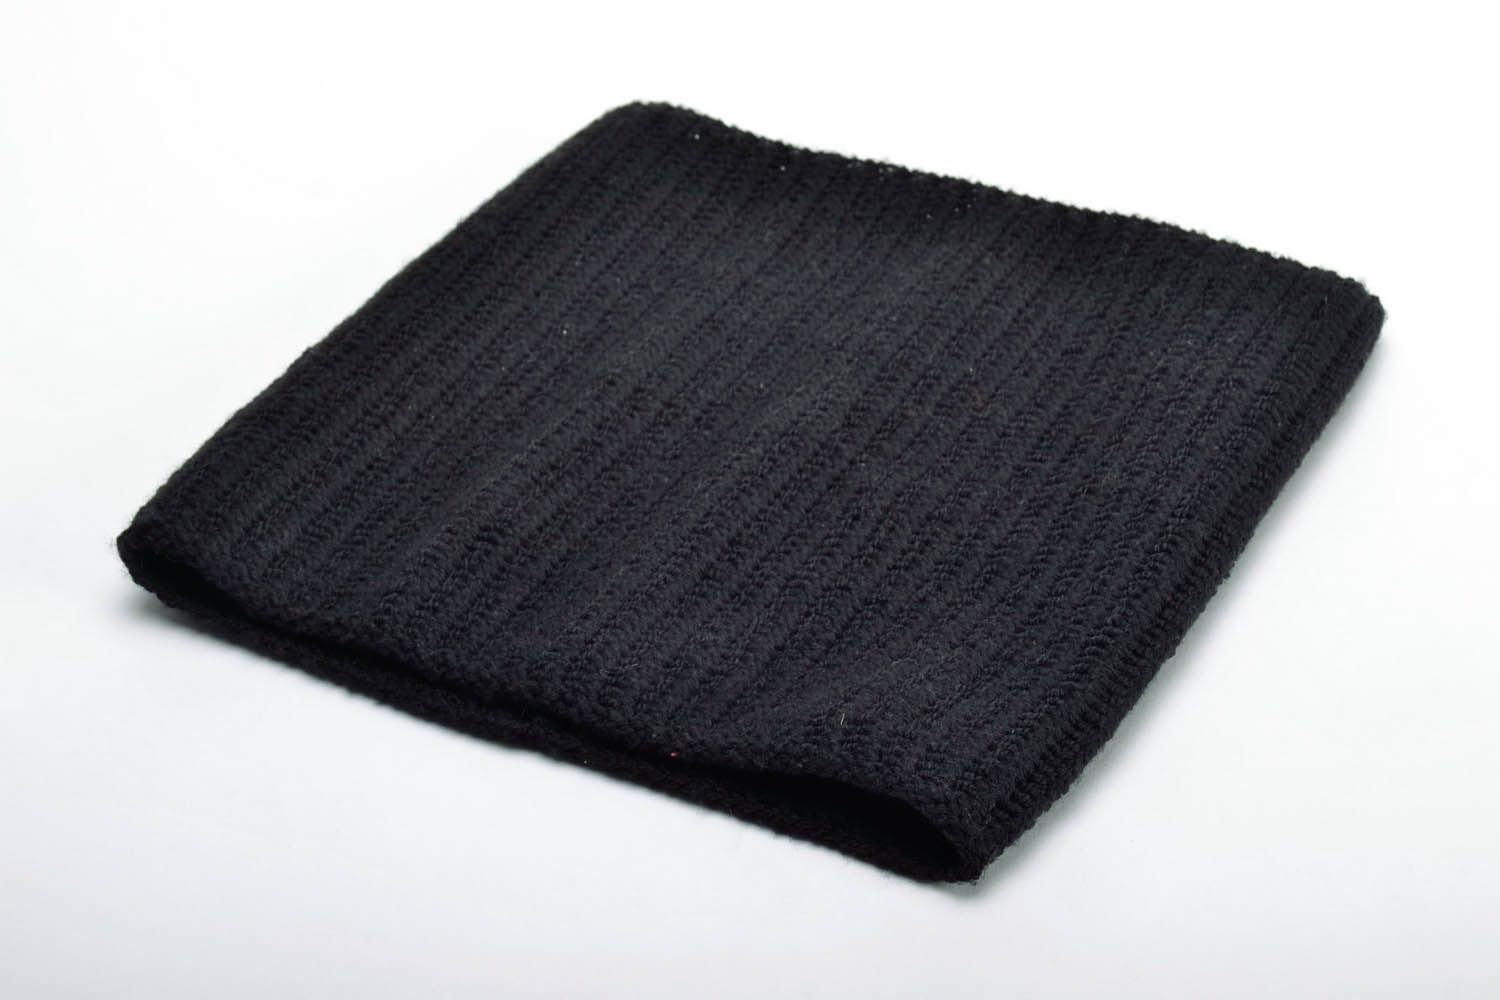 Knitted cowl photo 2